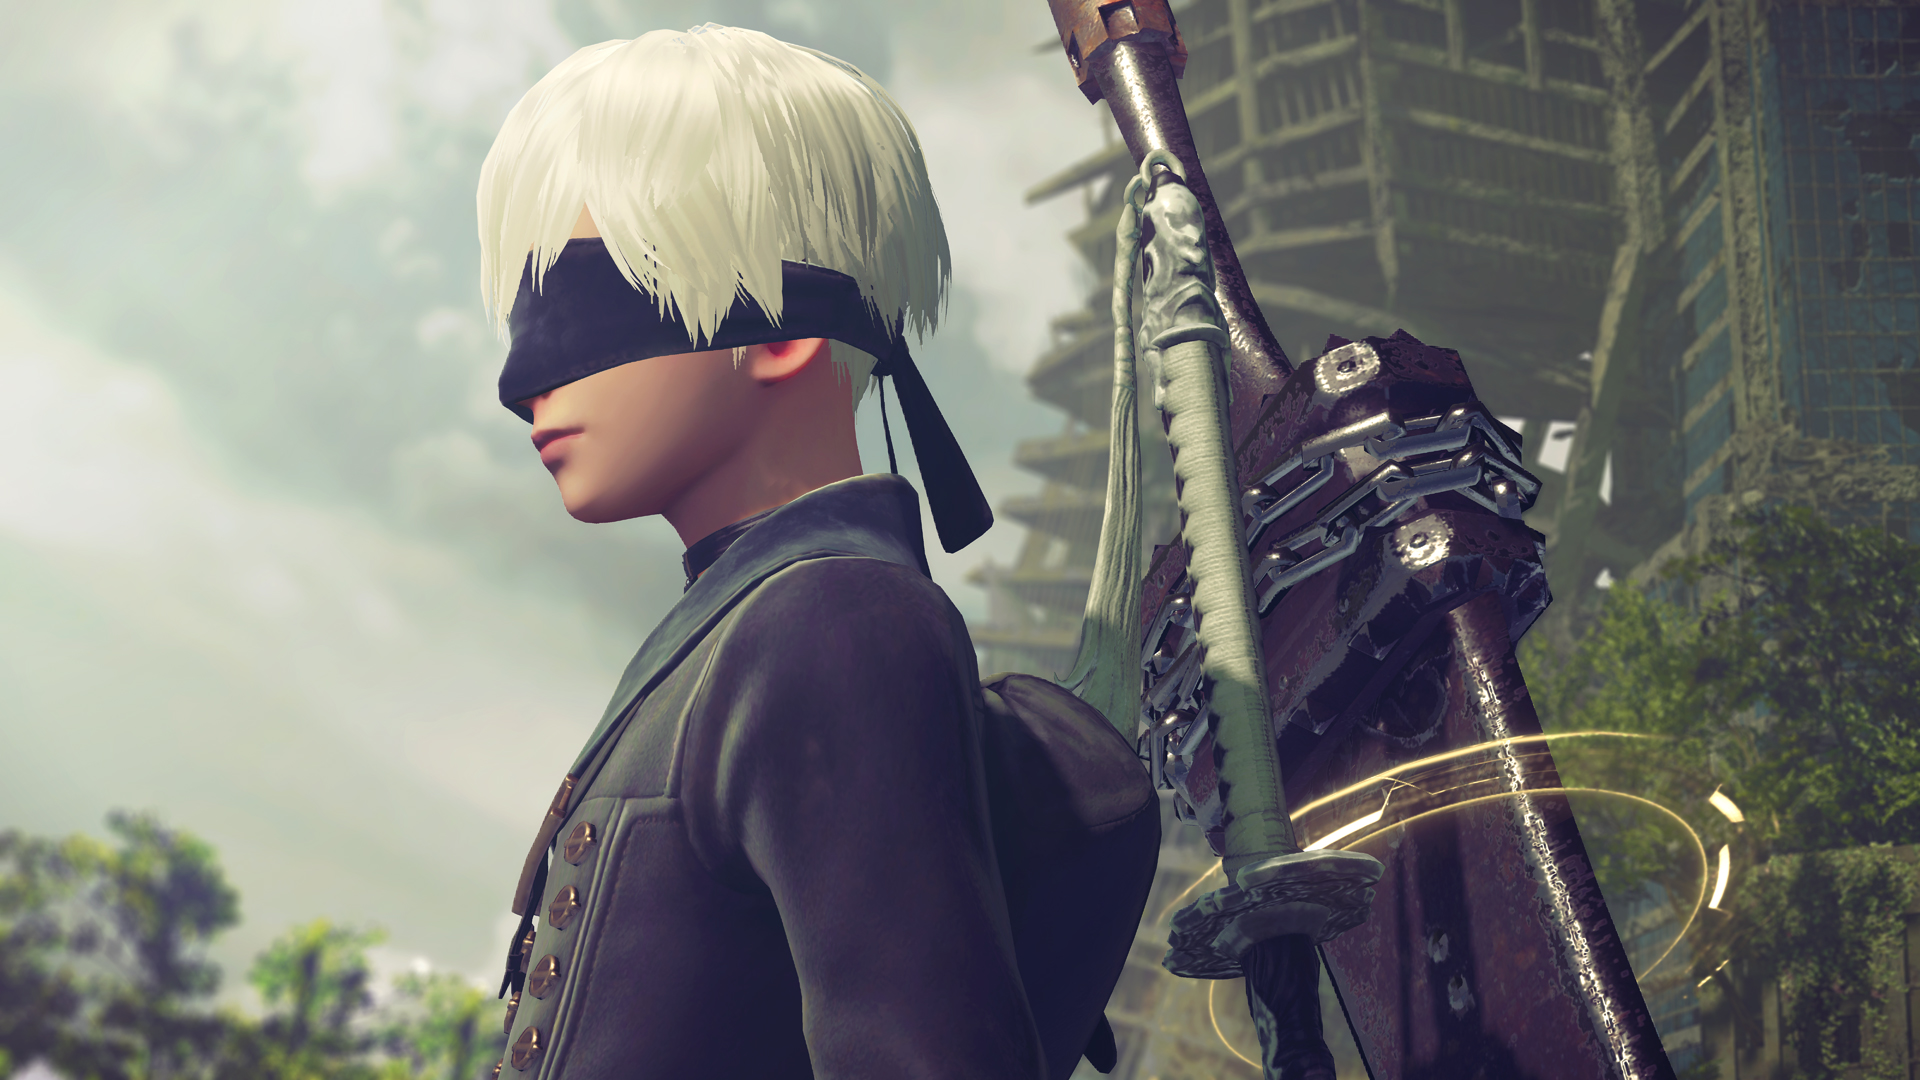 Nier: Automata is strange, thrilling, and totally worth your time